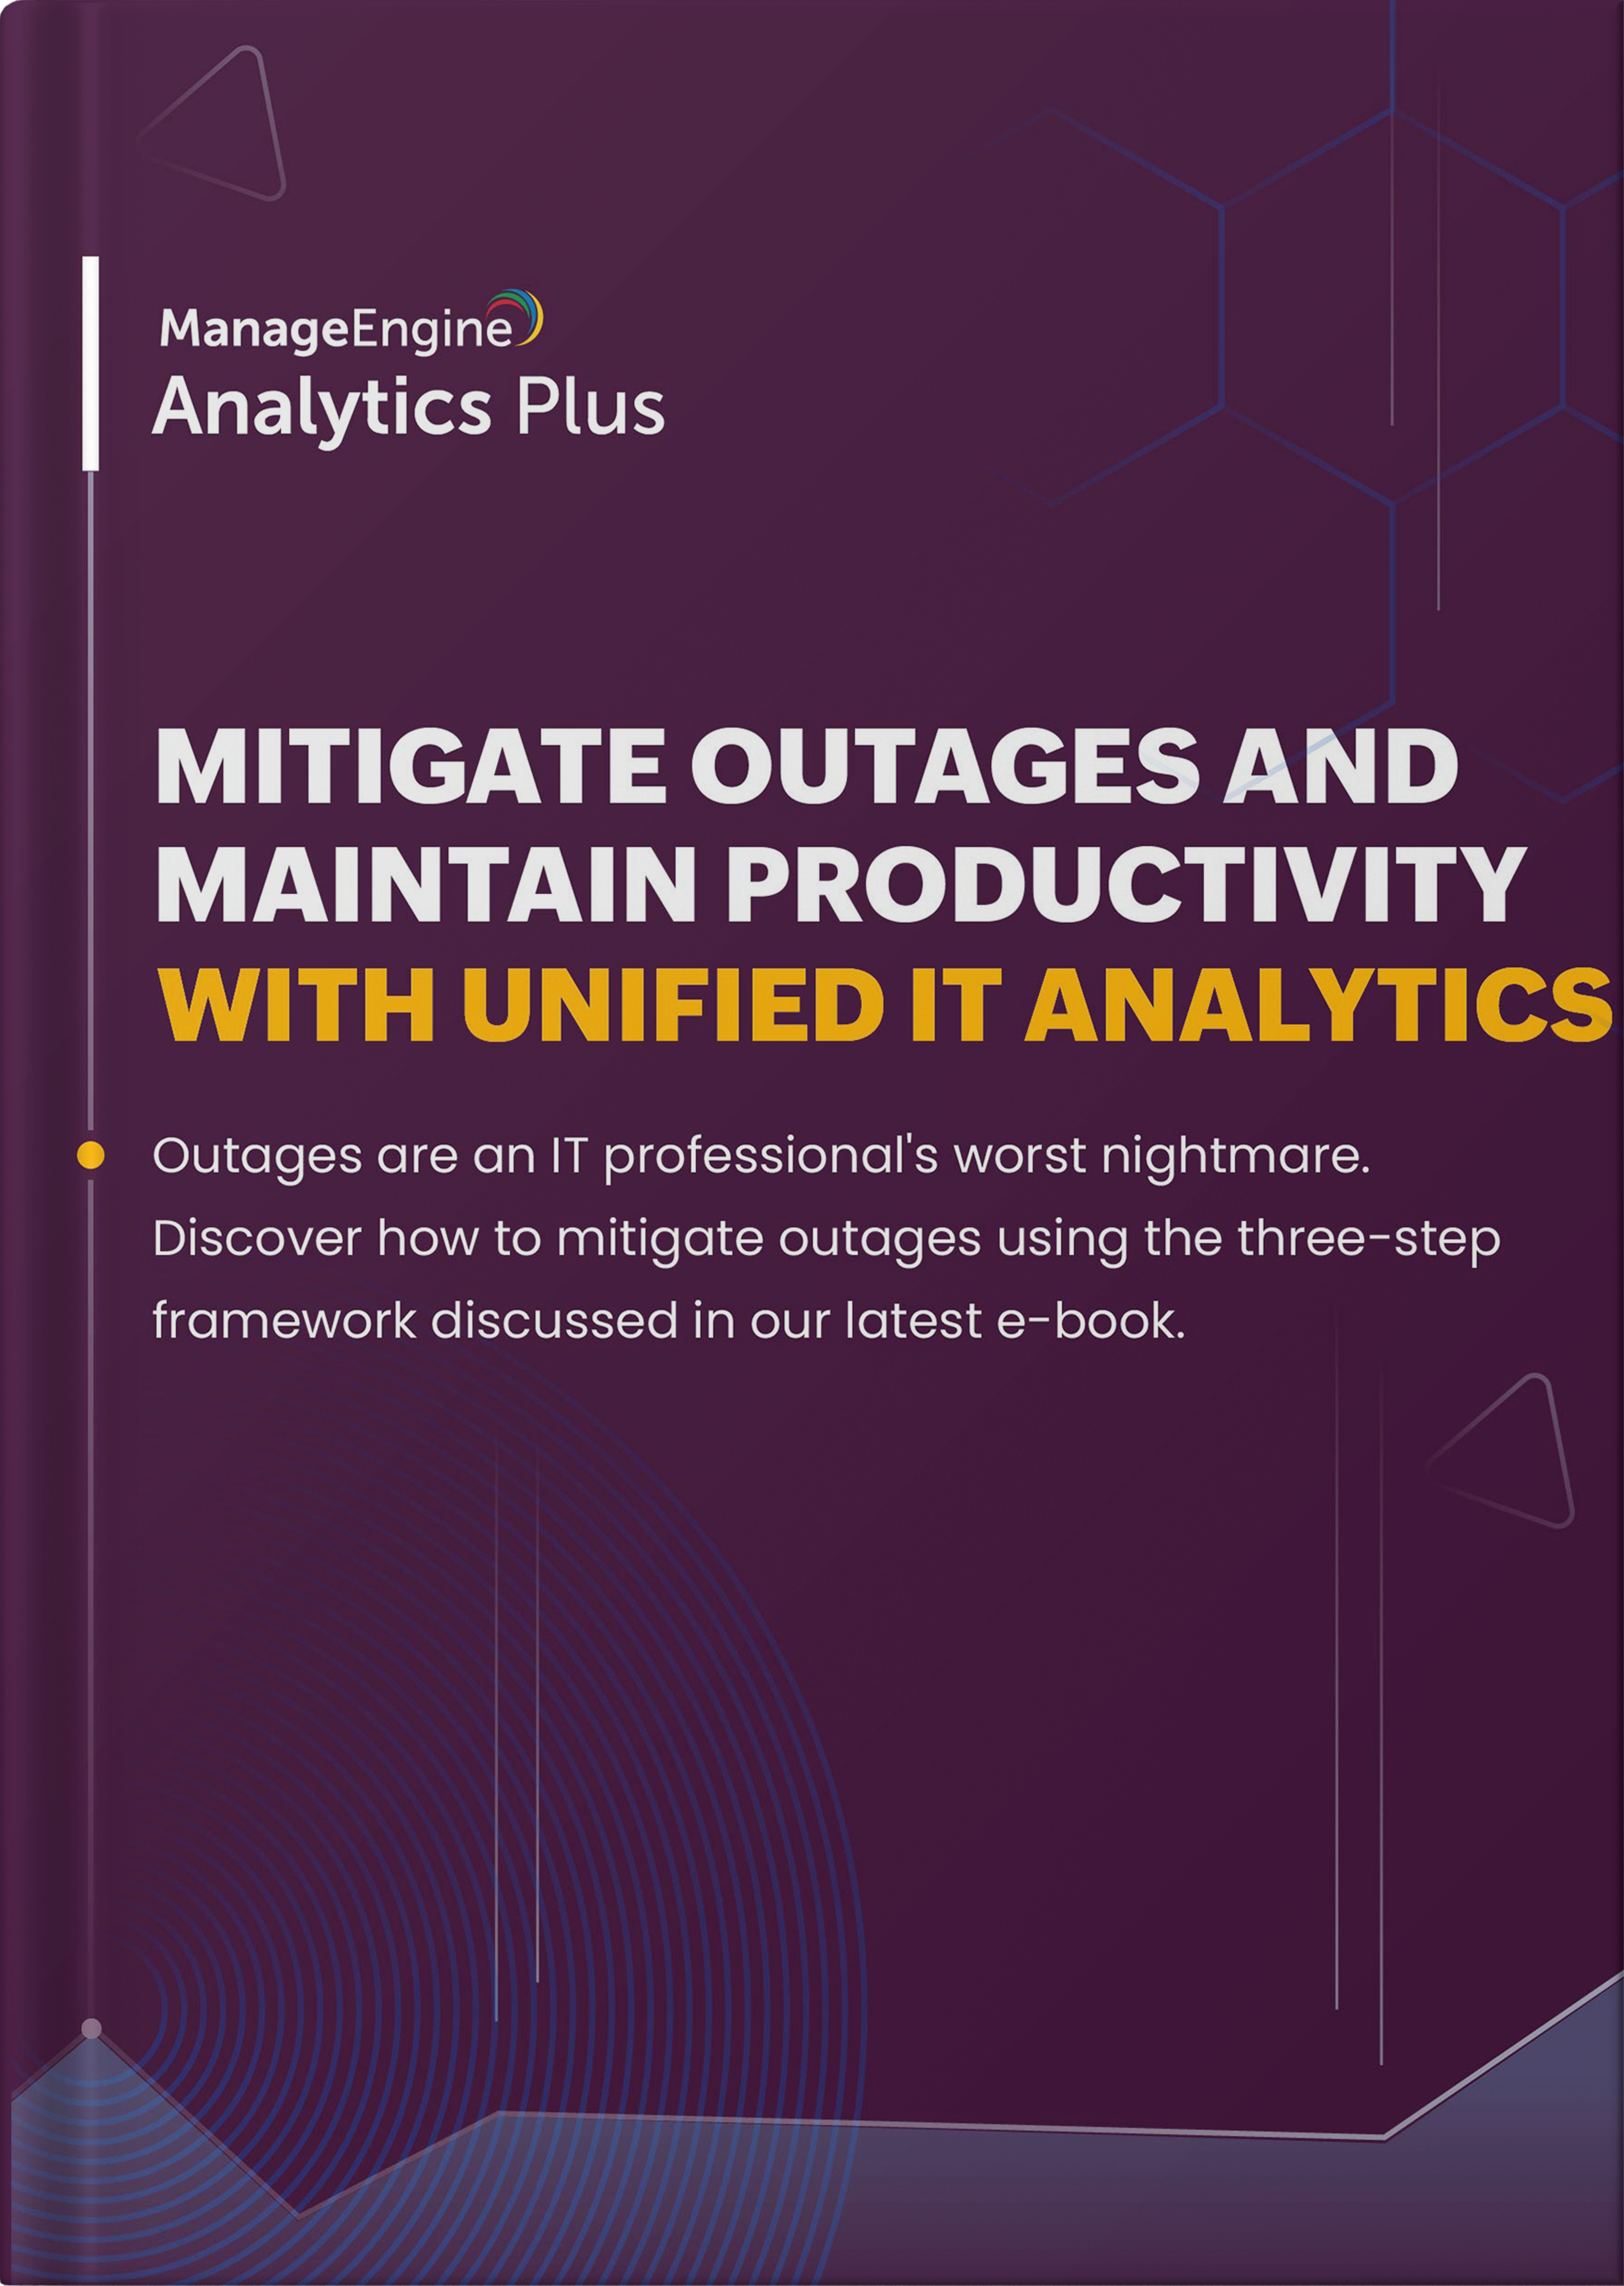 The 3-step guide to mitigate outages with unified IT analytics 